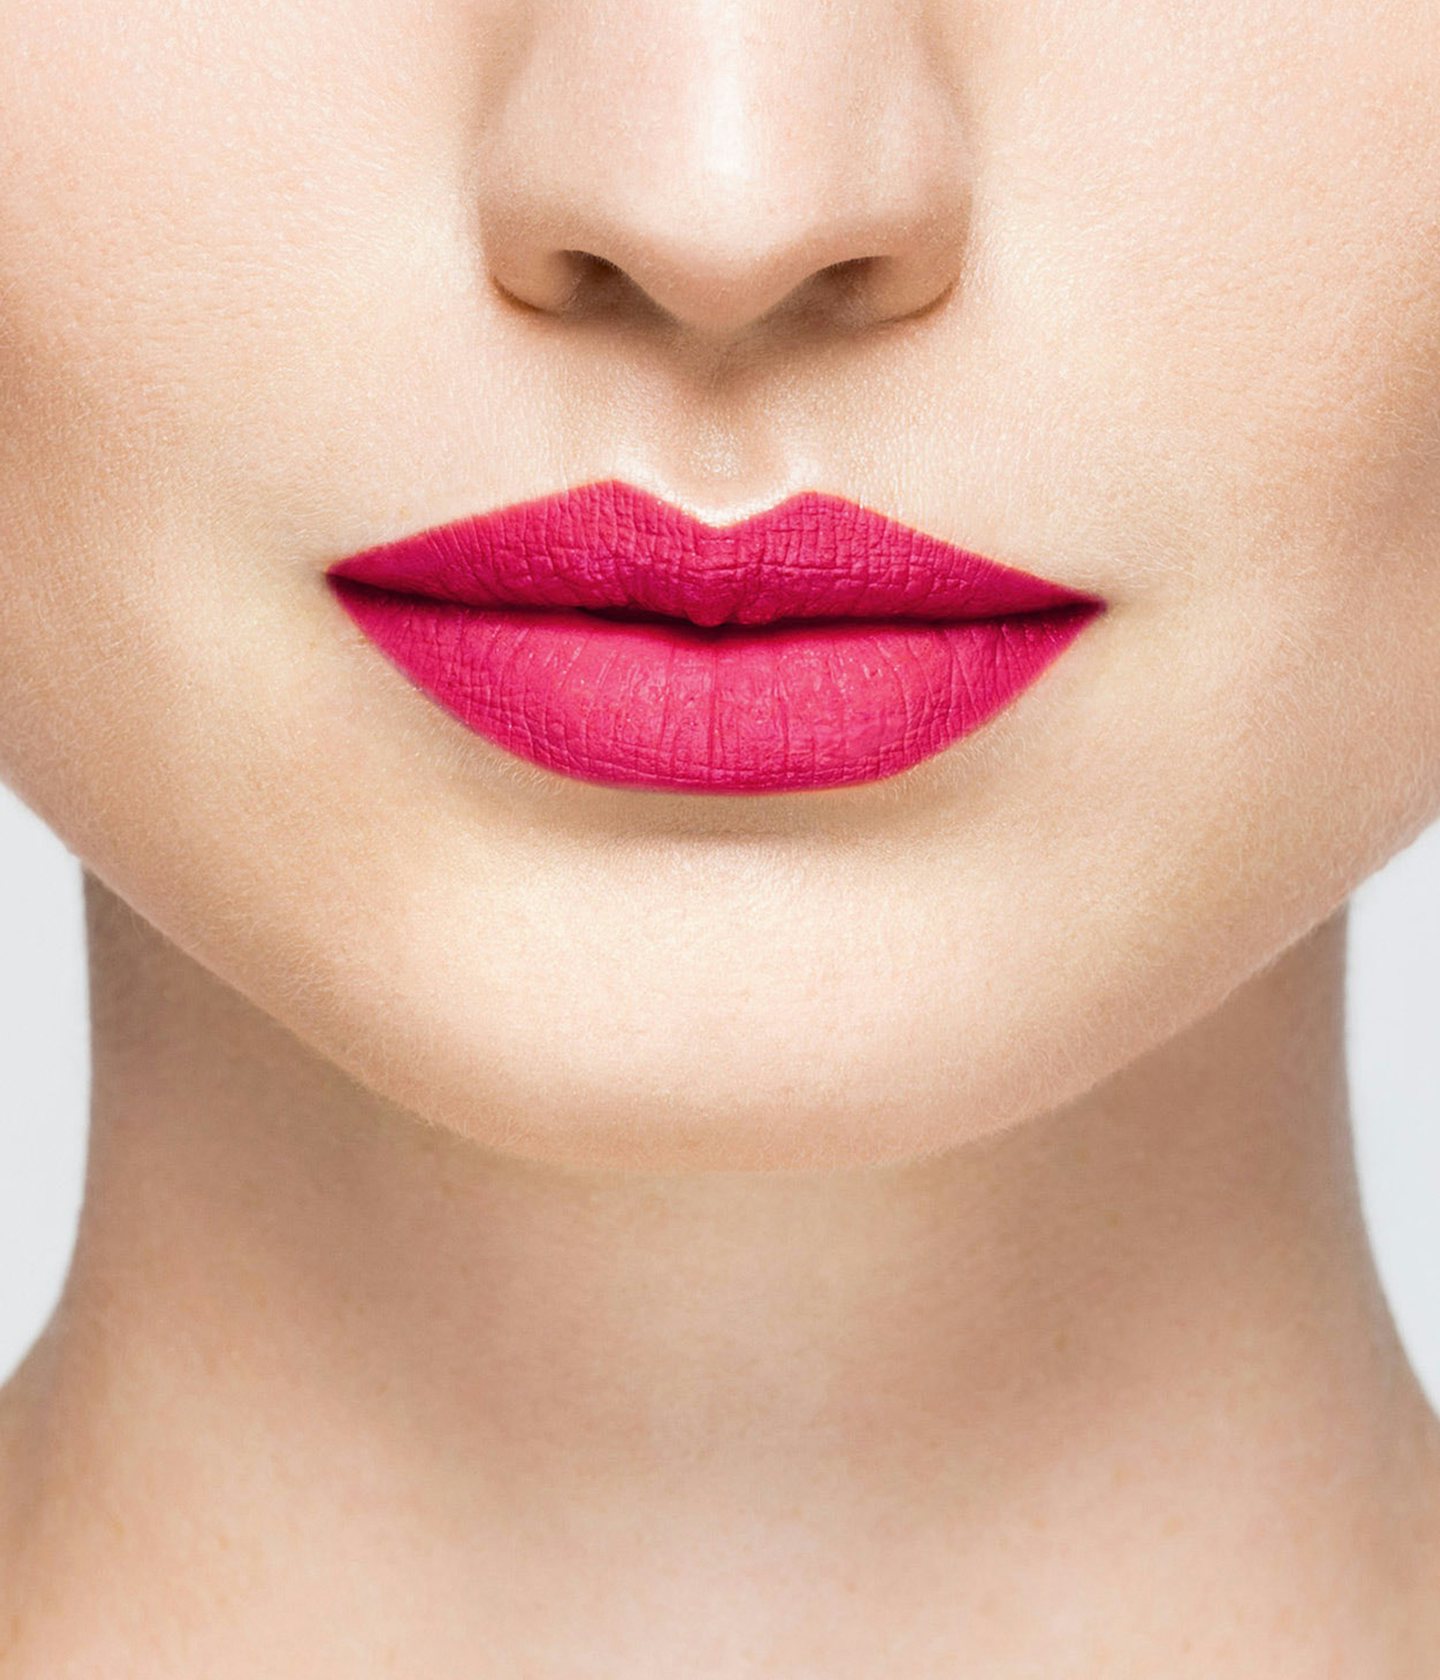 La bouche rouge Princess Pink lipstick shade on the lips of a fair skin model